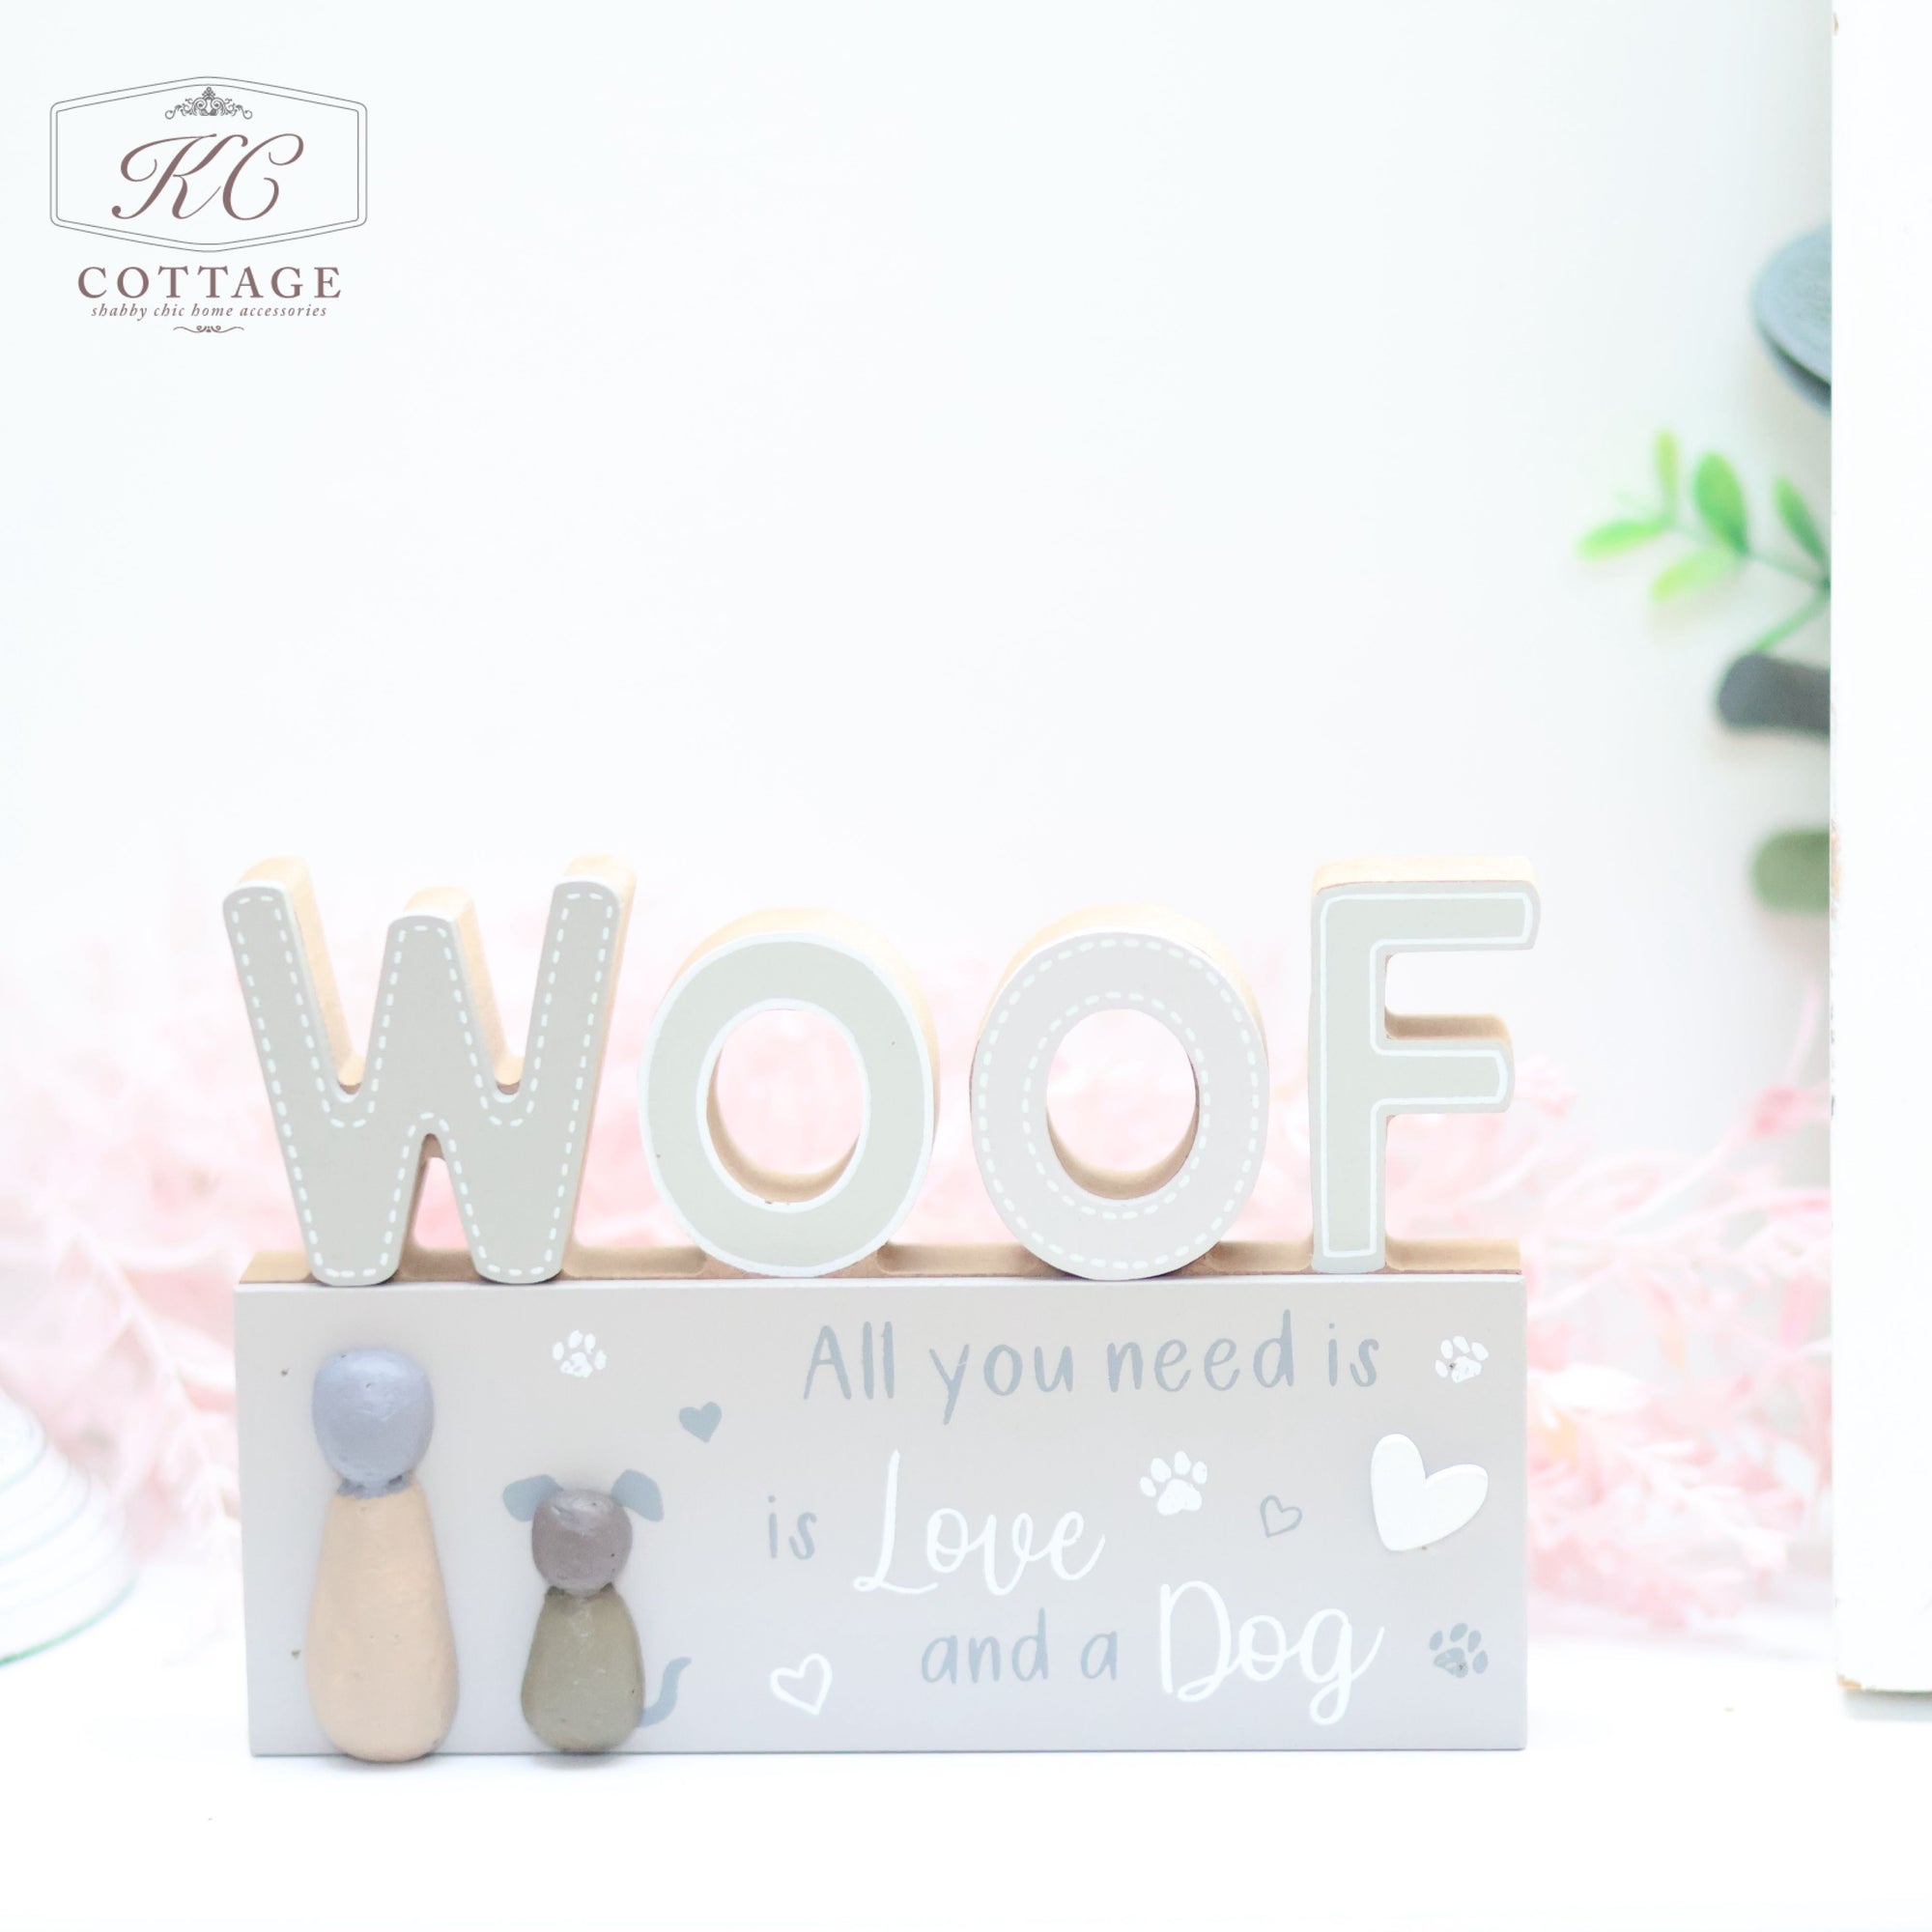 The Dog Pebble Signs, perfect for a dog lover's home décor, features large block letters spelling "WOOF" in white and beige. Below, it reads "All you need is Love and a Dog" with paw prints and heart motifs. To the left, cute figurines of a dog and a cat add charm. The upper left corner has a "KC Cottage" logo.